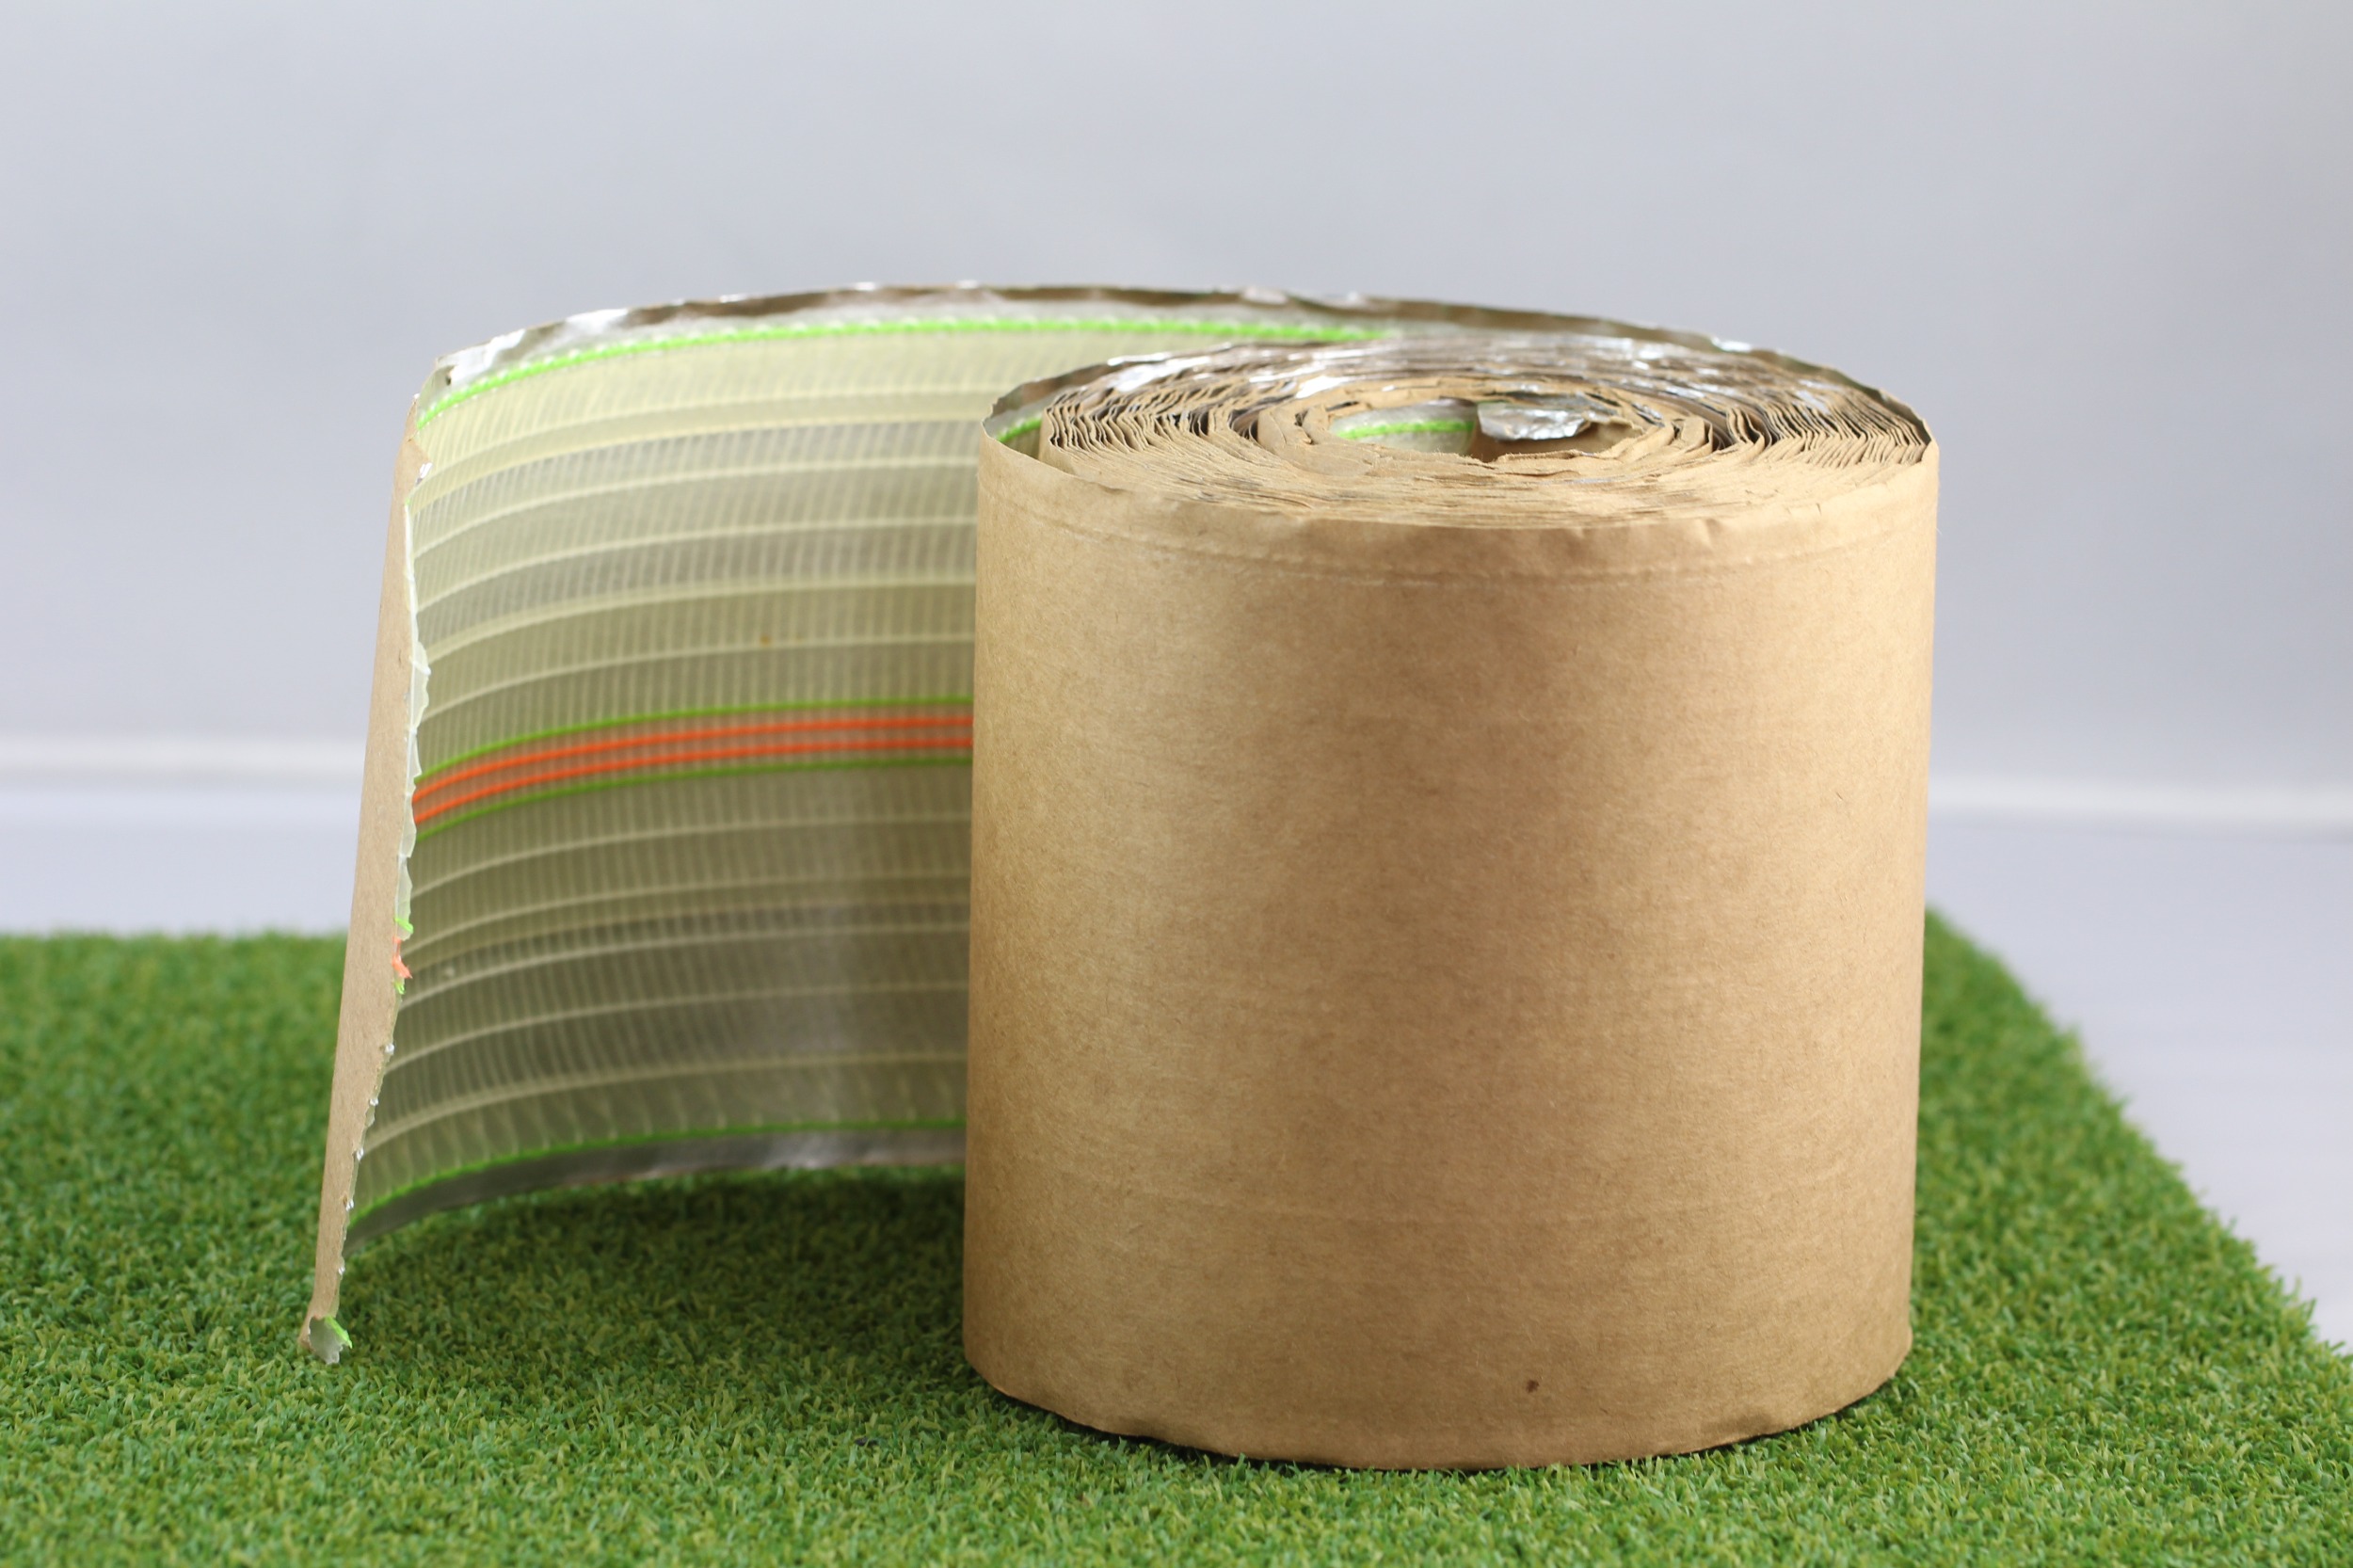 EasySeam Tape Synthetic Grass Synthetic Grass Tools Installation San Jose